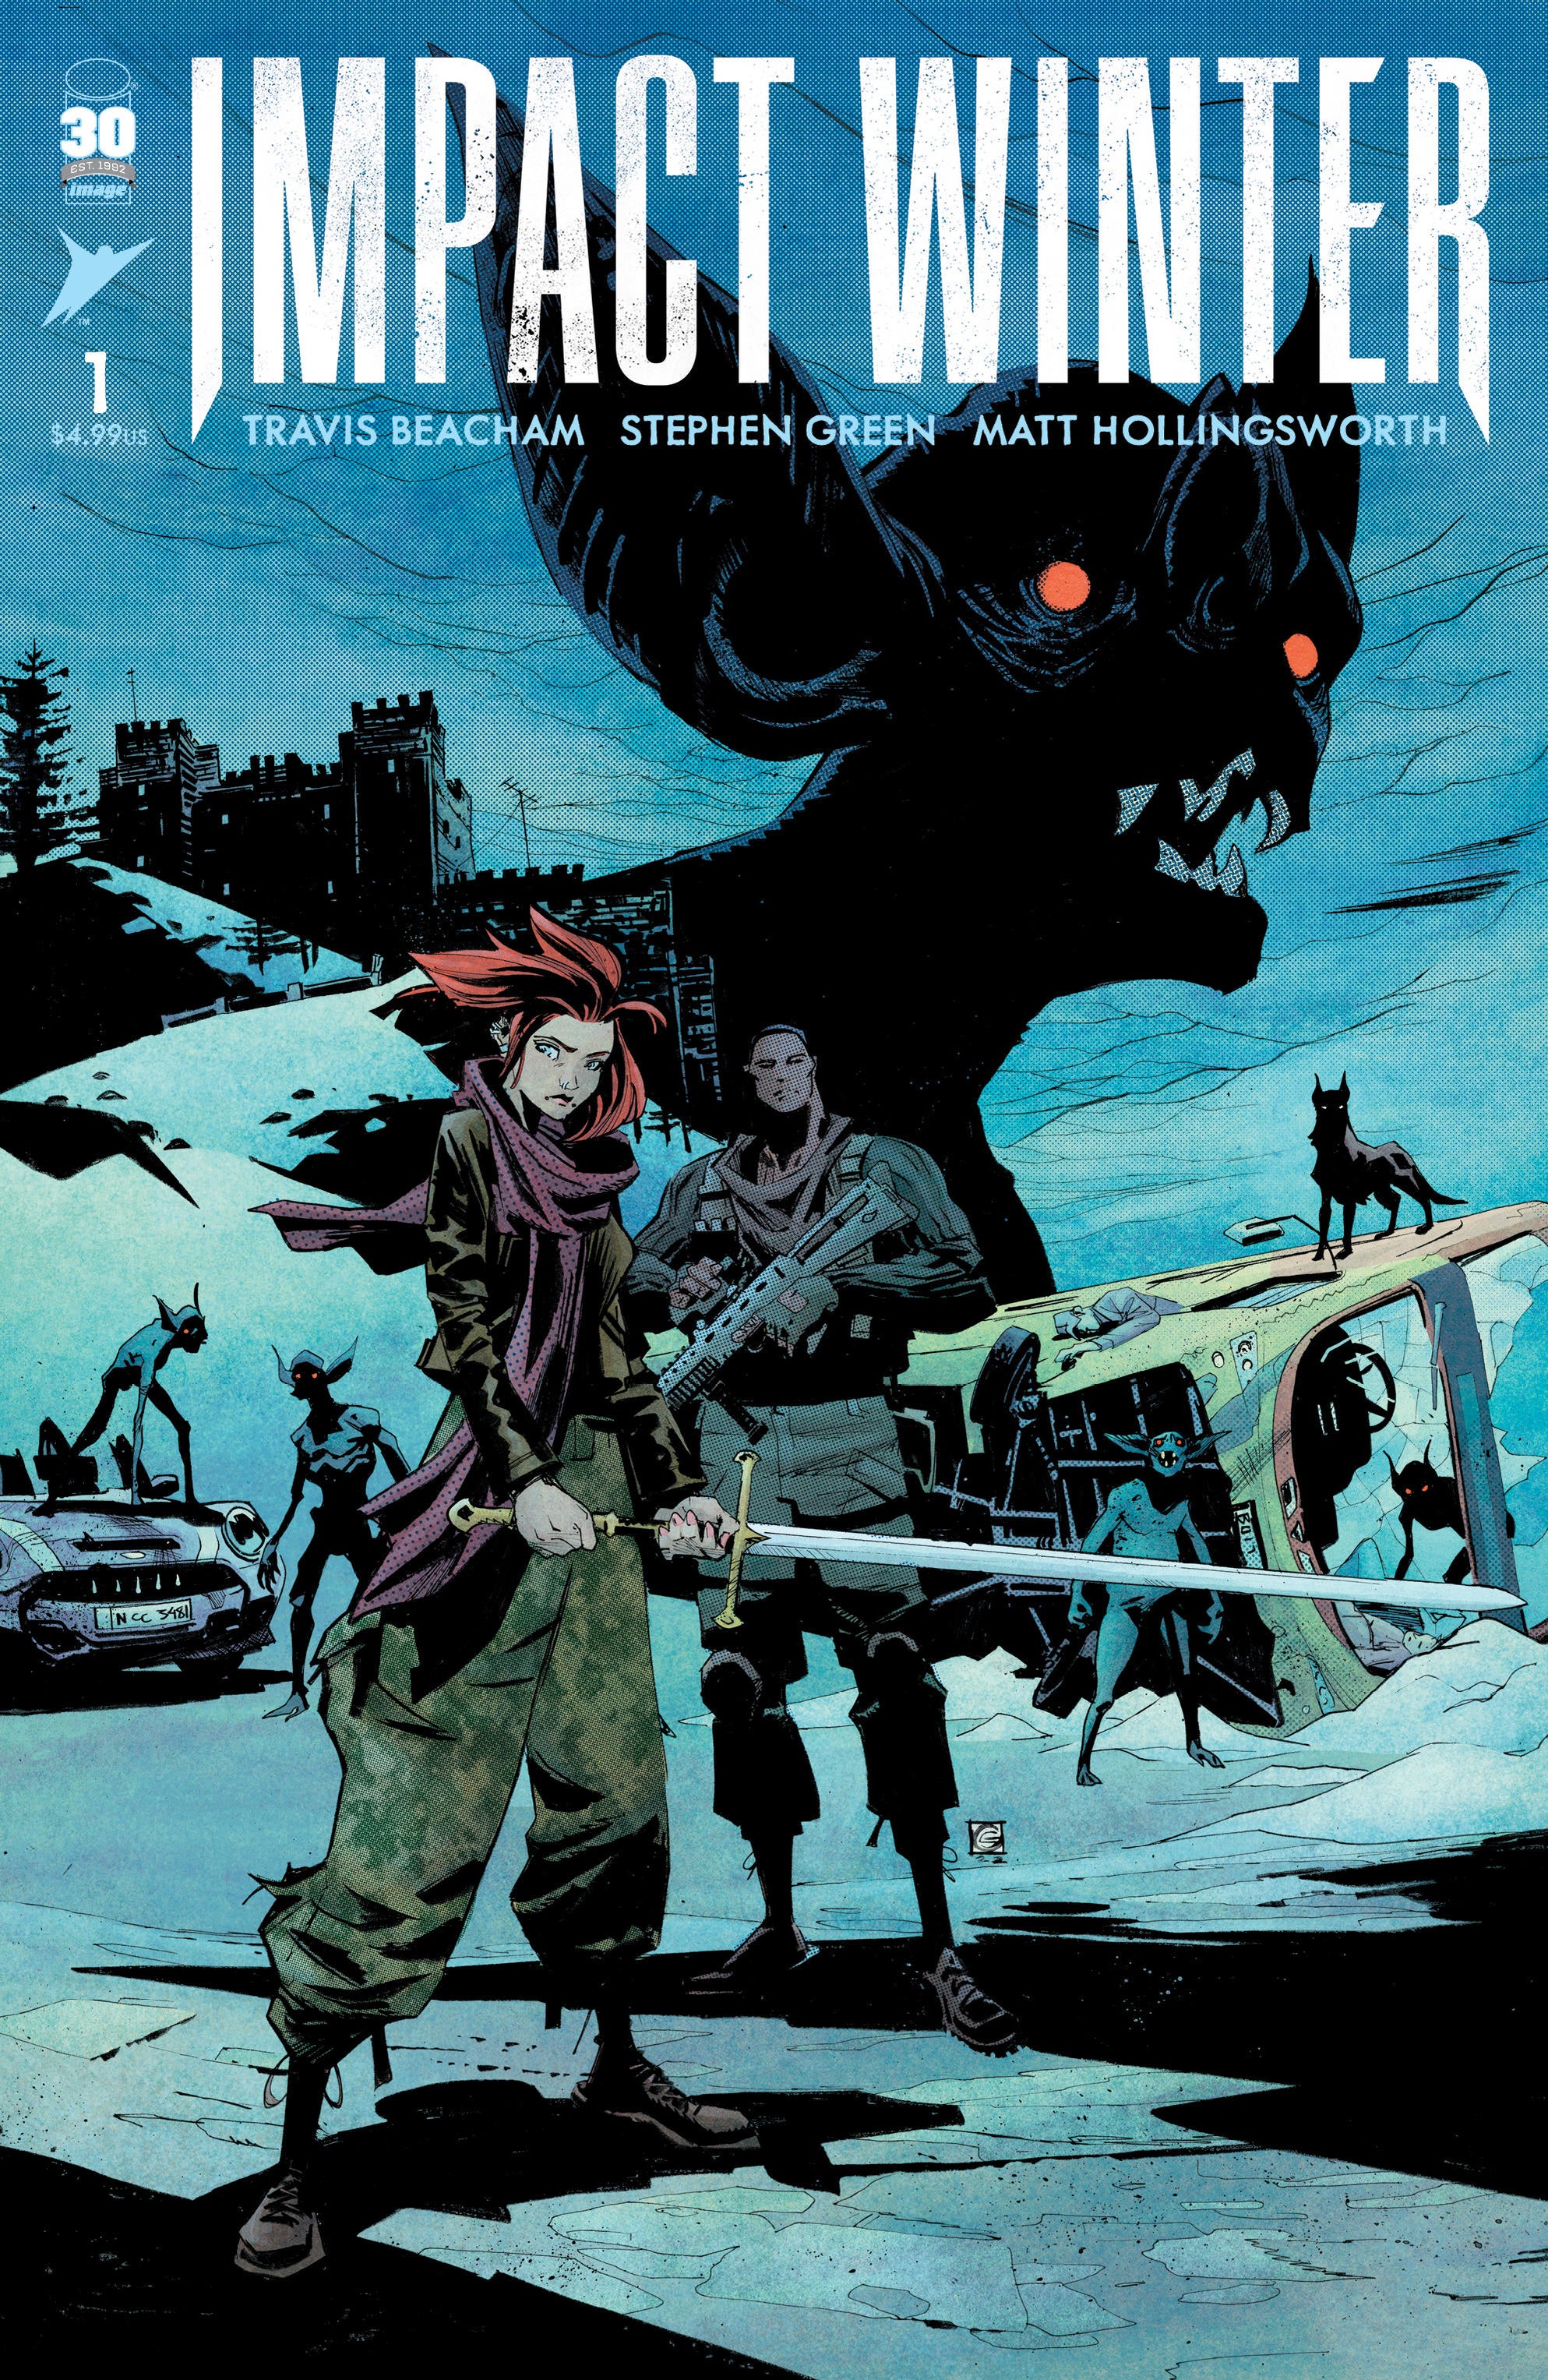 01-mpactwinter01-cover.jpg